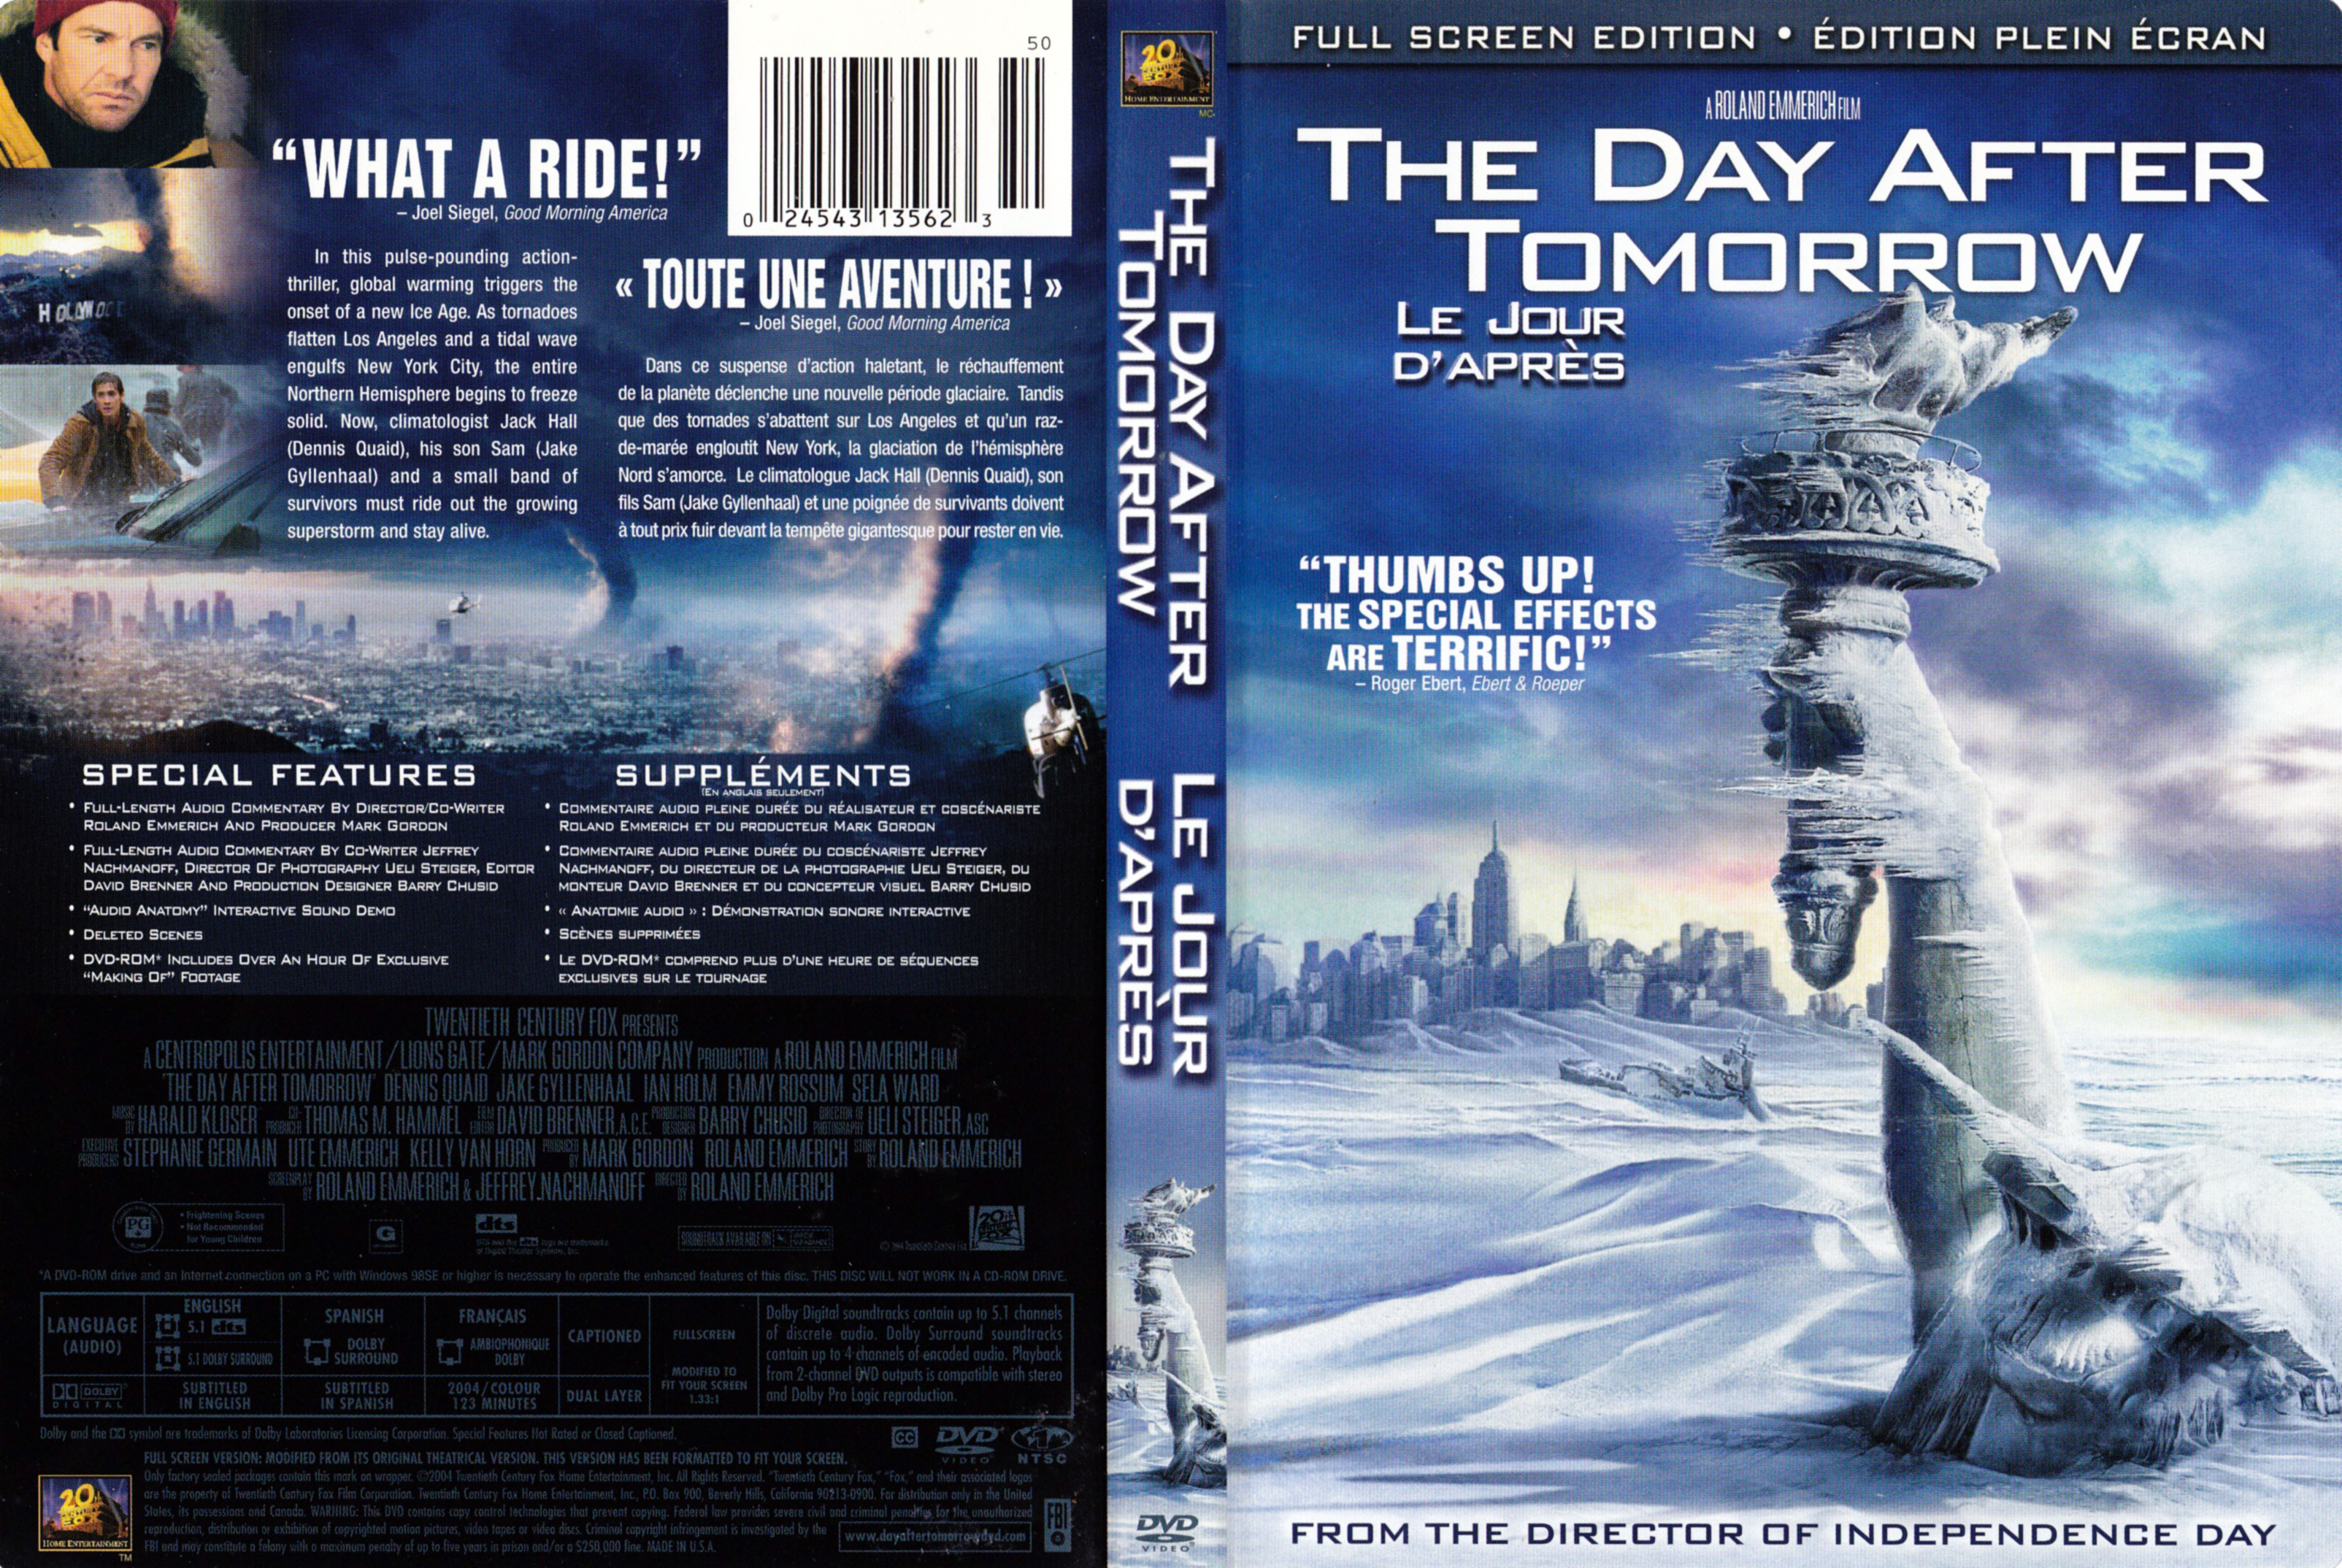 Jaquette DVD The day after tomorrow - Le jour d